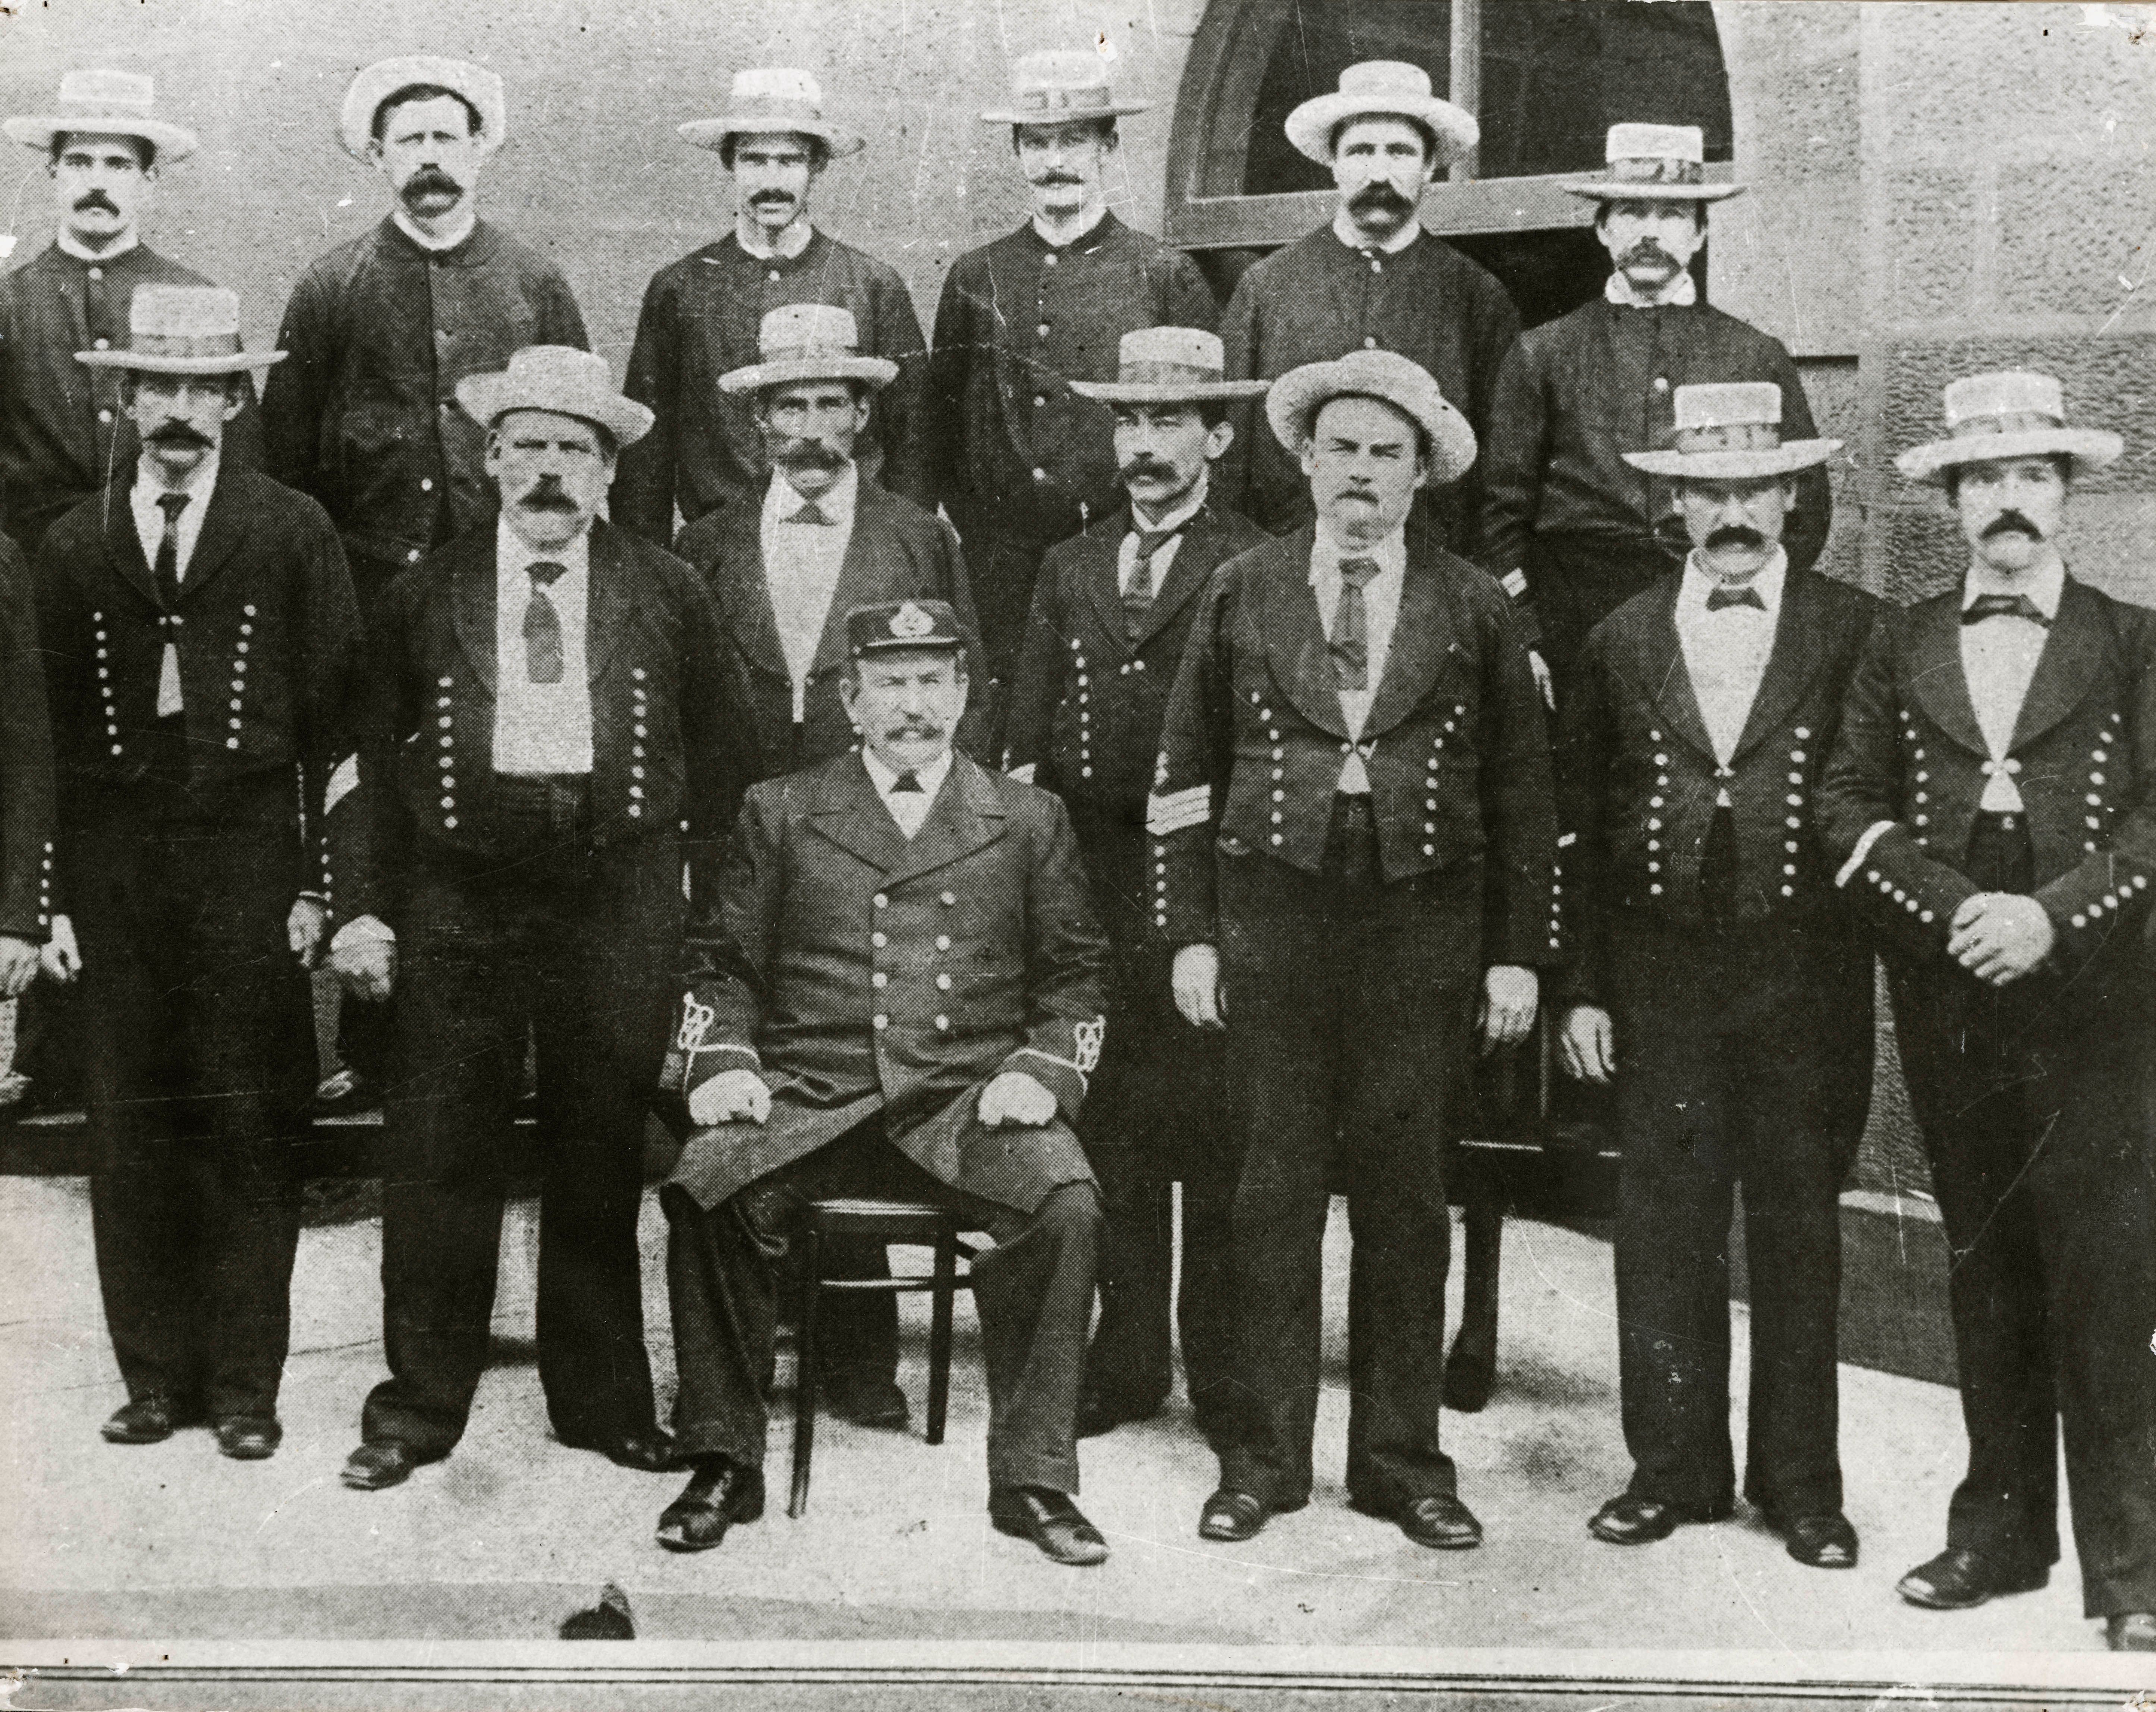 A group of men in uniforms, wearing ties and hats